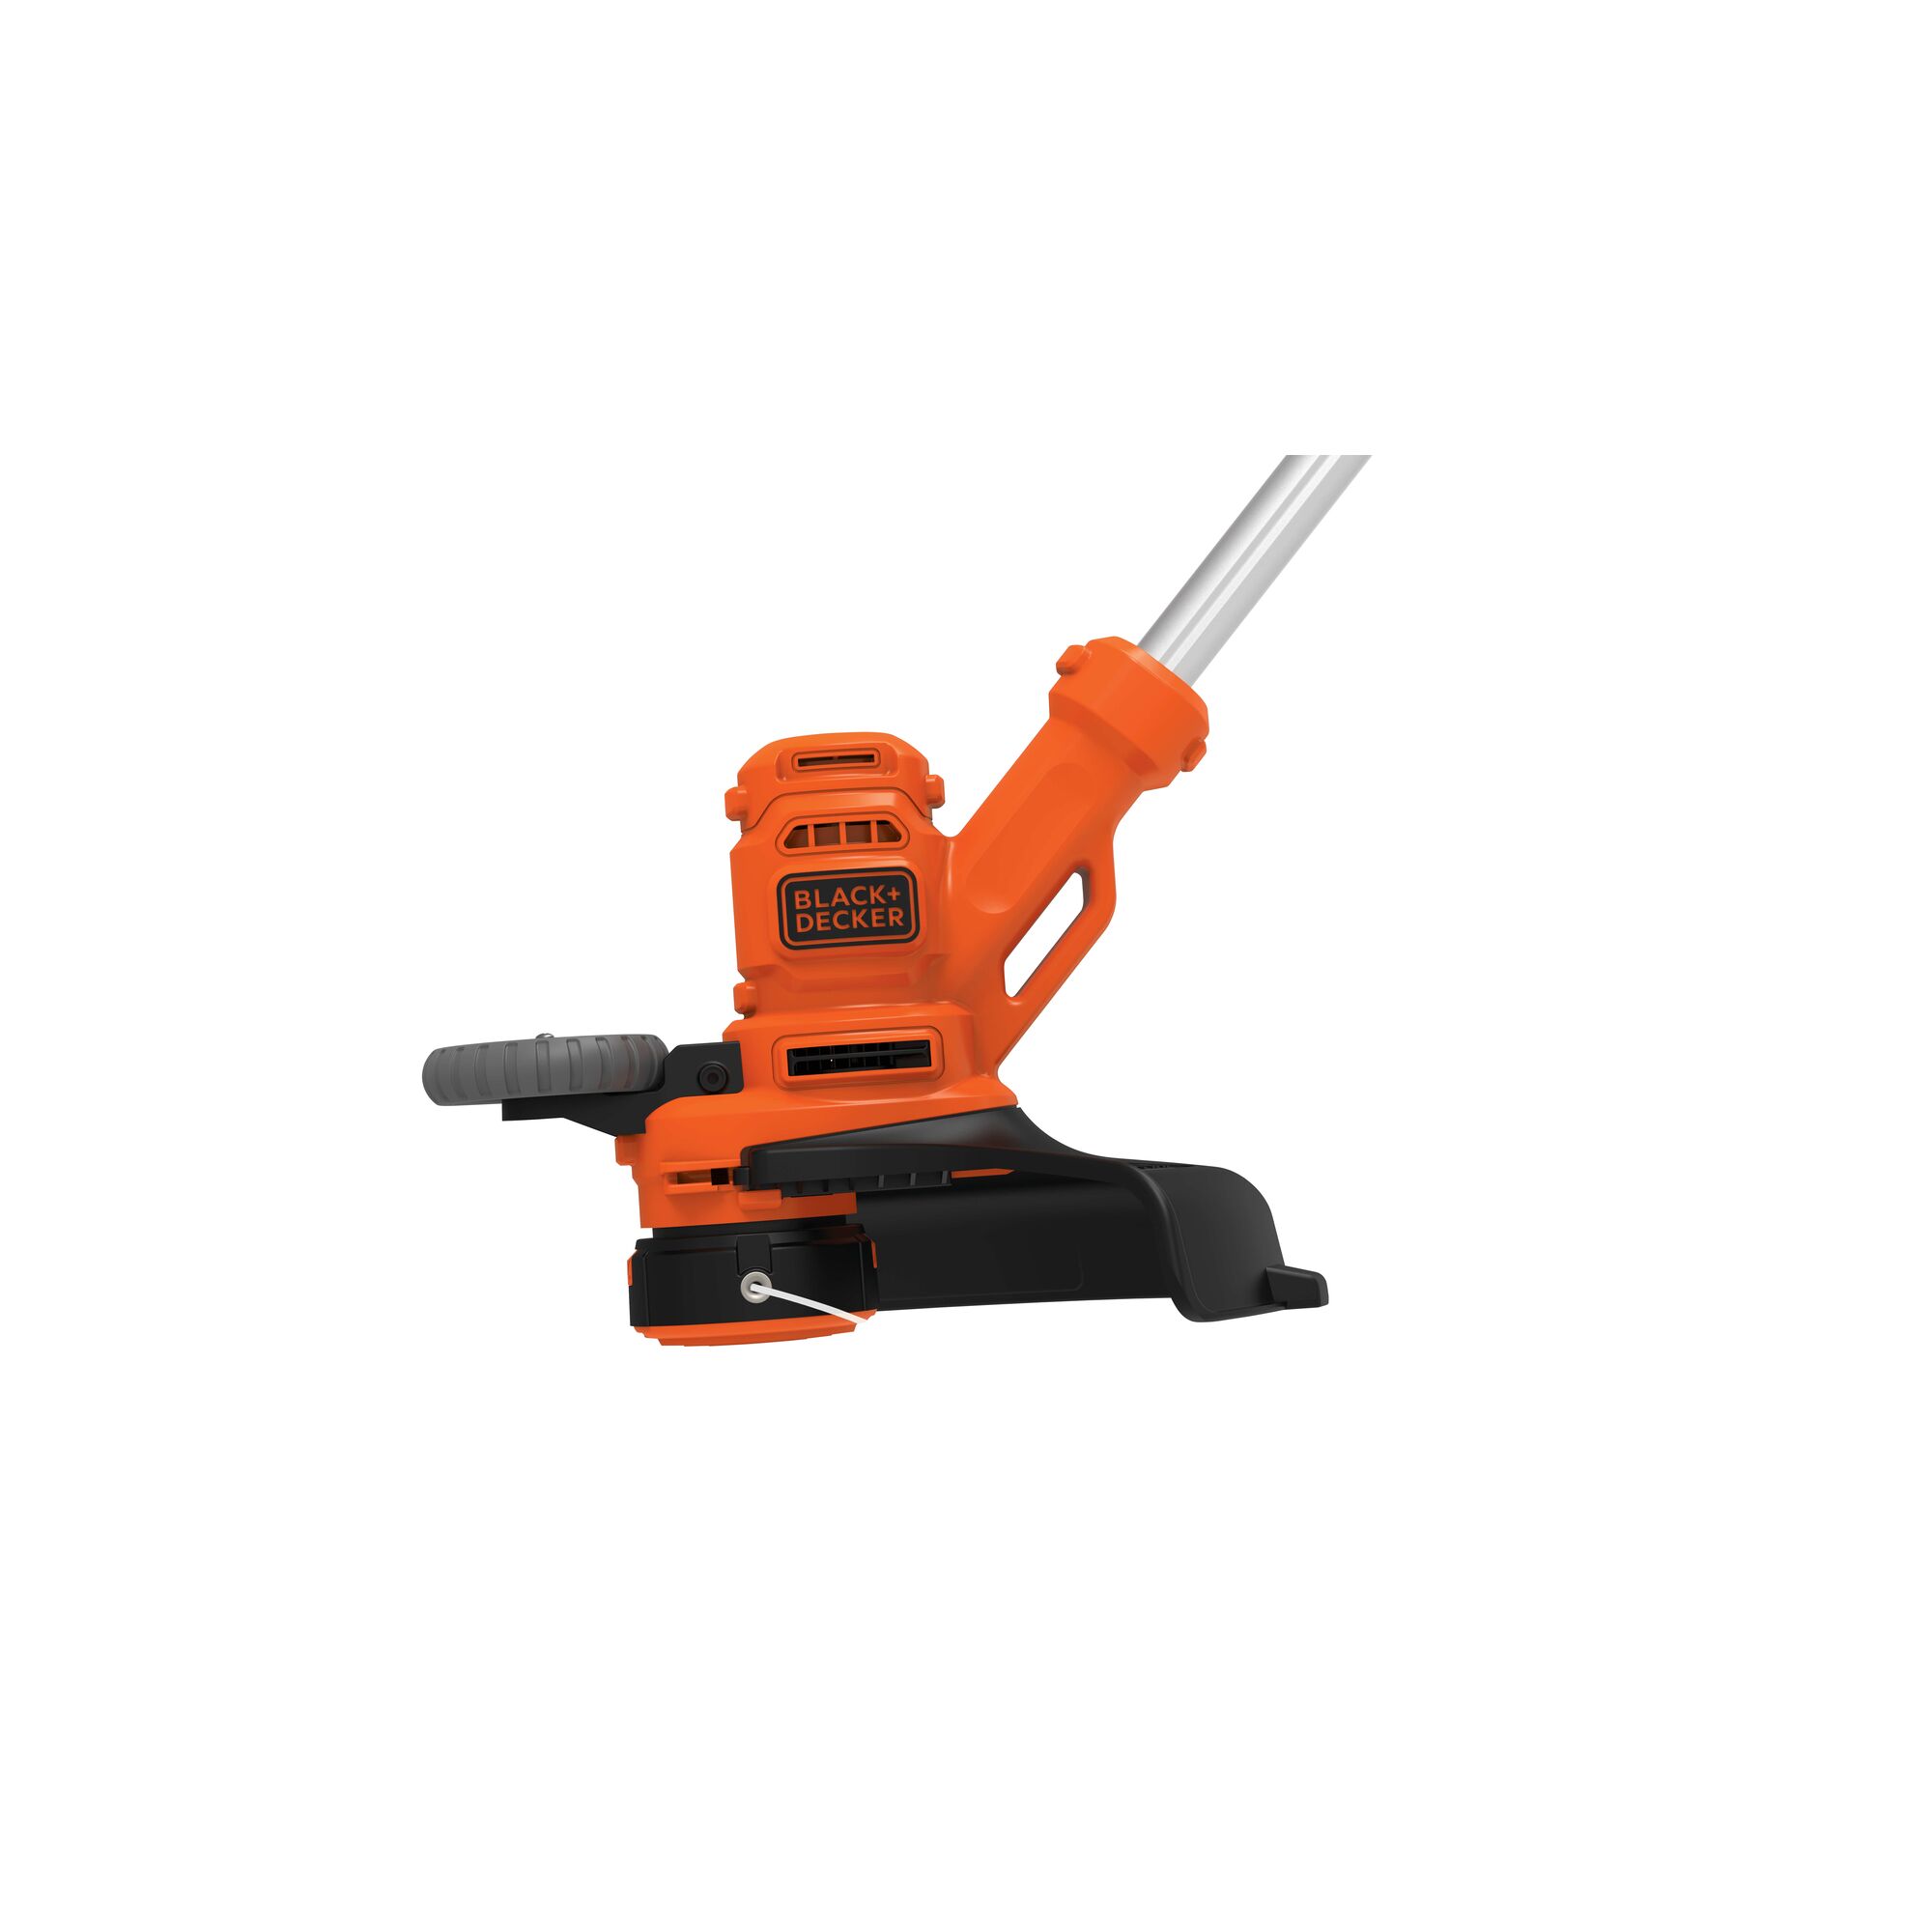 Profile of 6.5 ampere 14 inch powercommand electric string trimmer/edger with easyfeed.